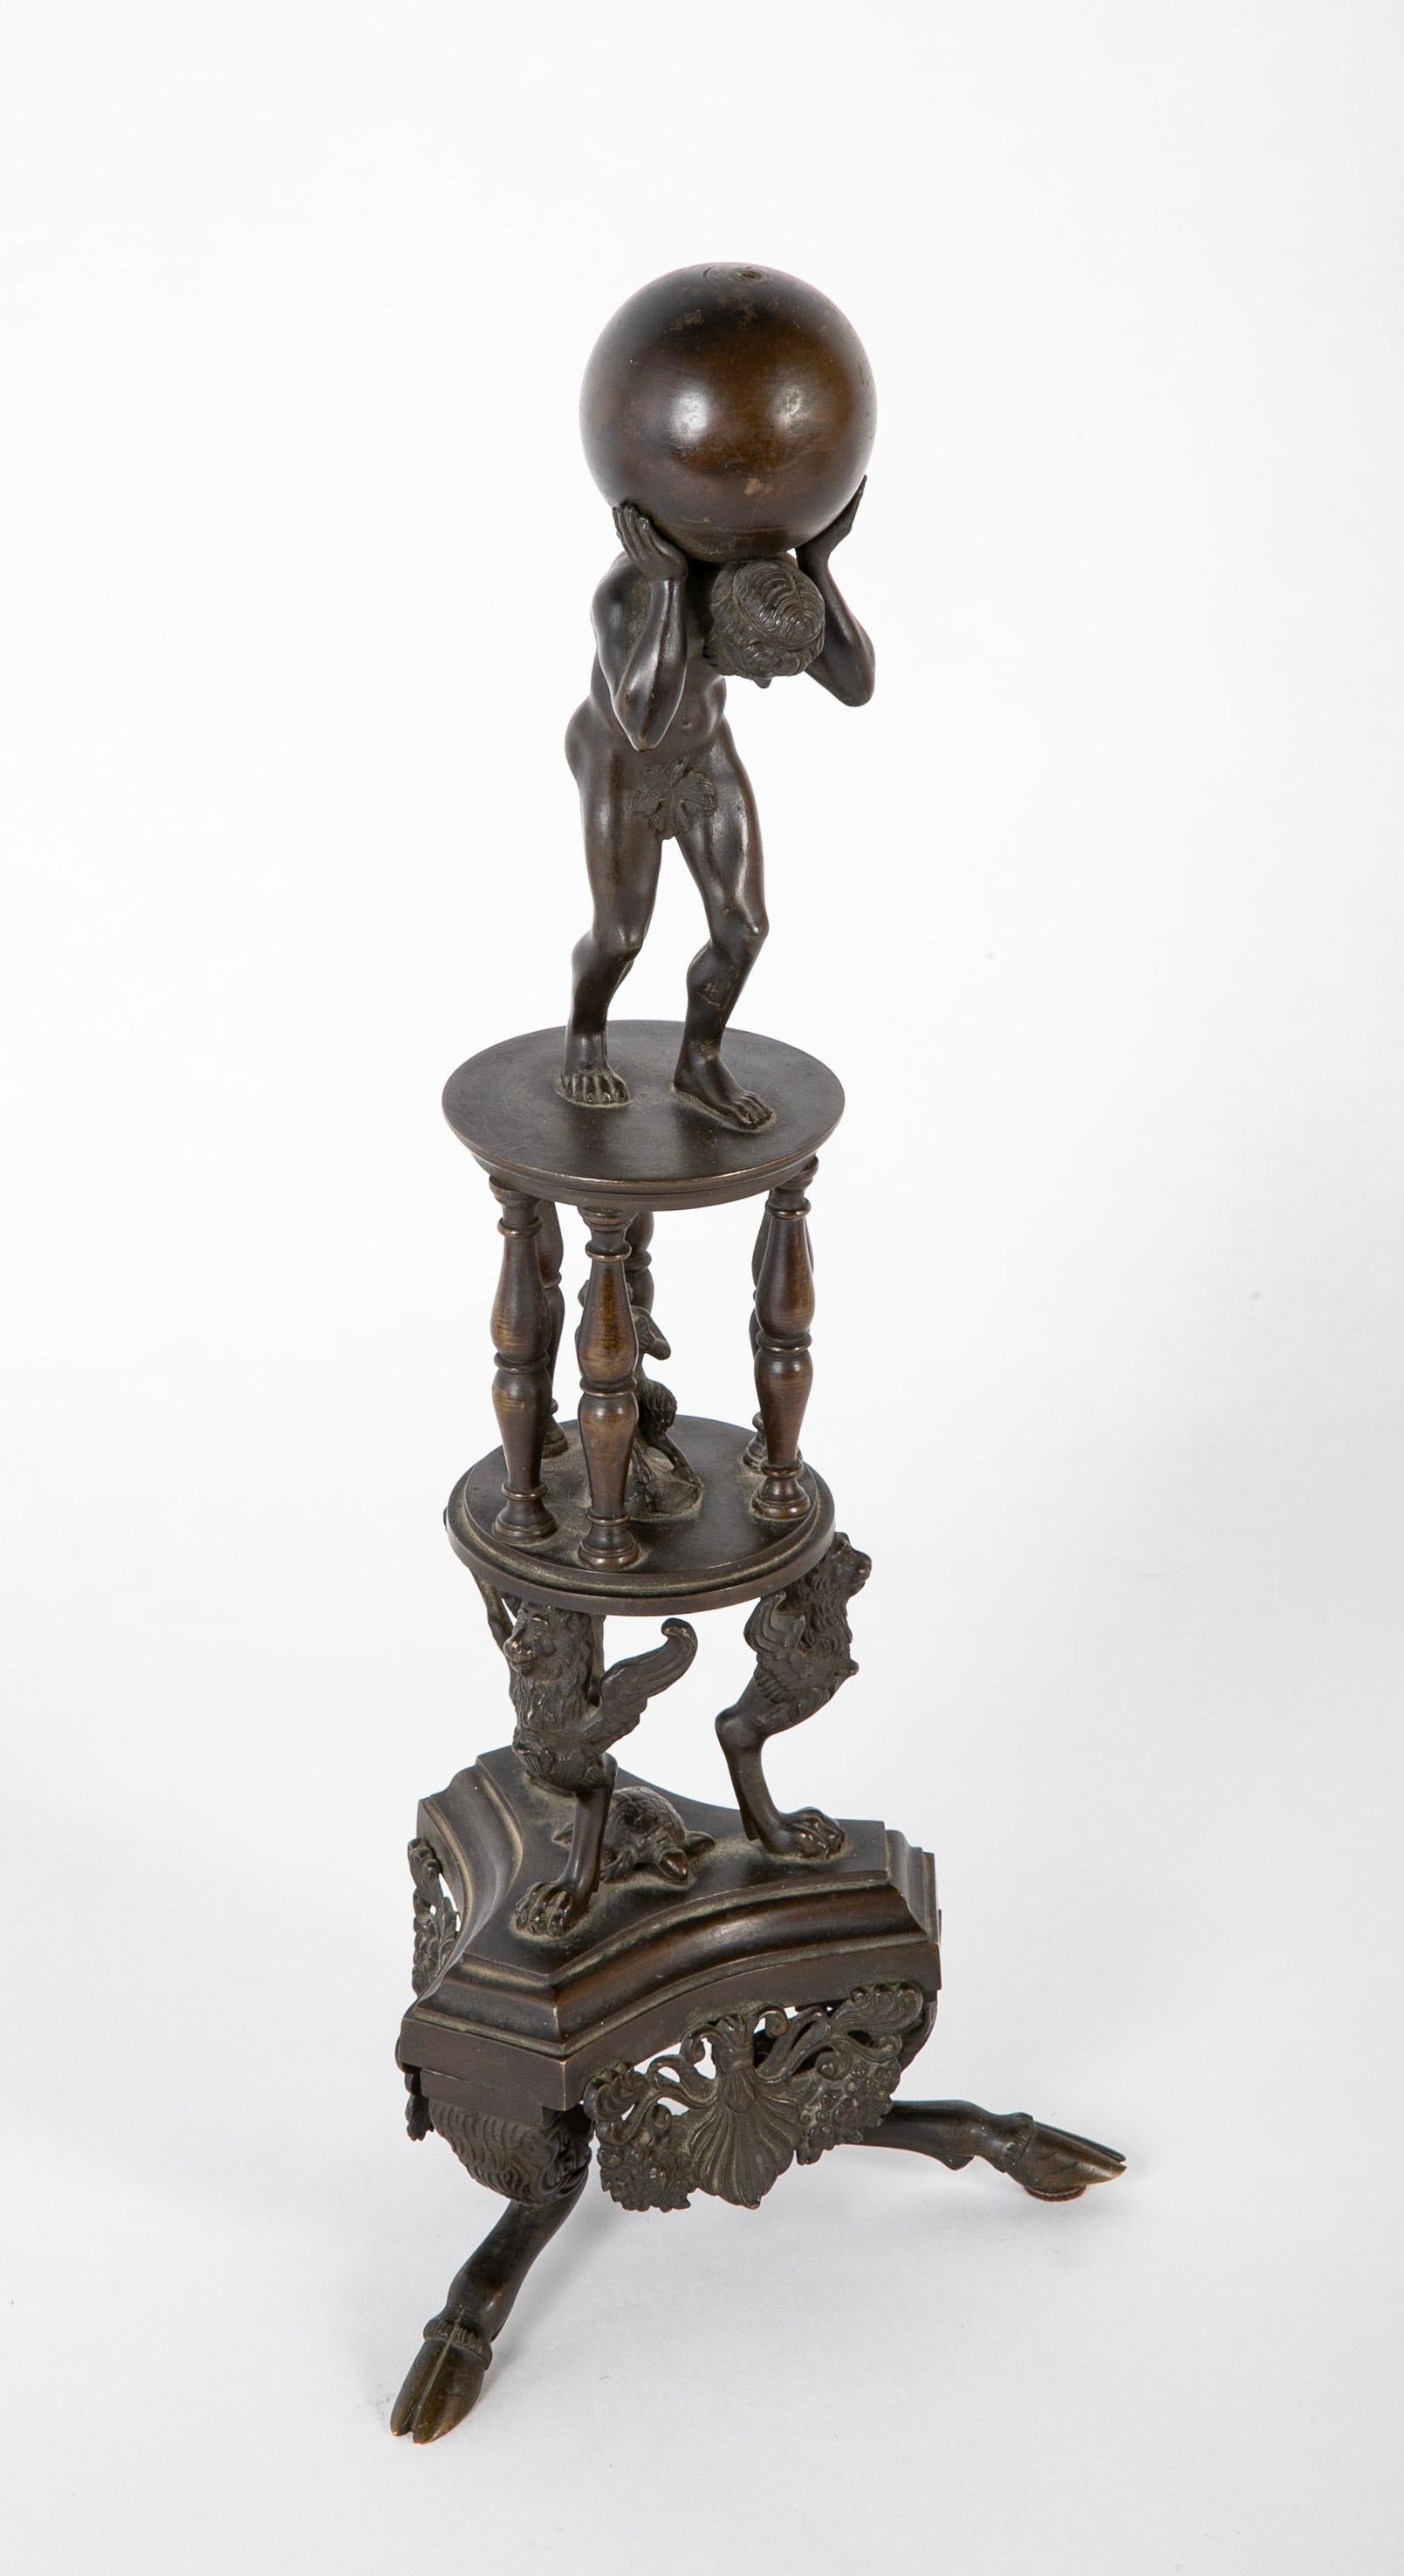 Italian Grand Tour bronze in the Renaissance style of Atlas on an elaborate tripod base ending in hoof feet. The Greek god Atlas is is depicted naked on top holding the world upon his shoulders, below in a columned arcade sits Pan with his flute. On